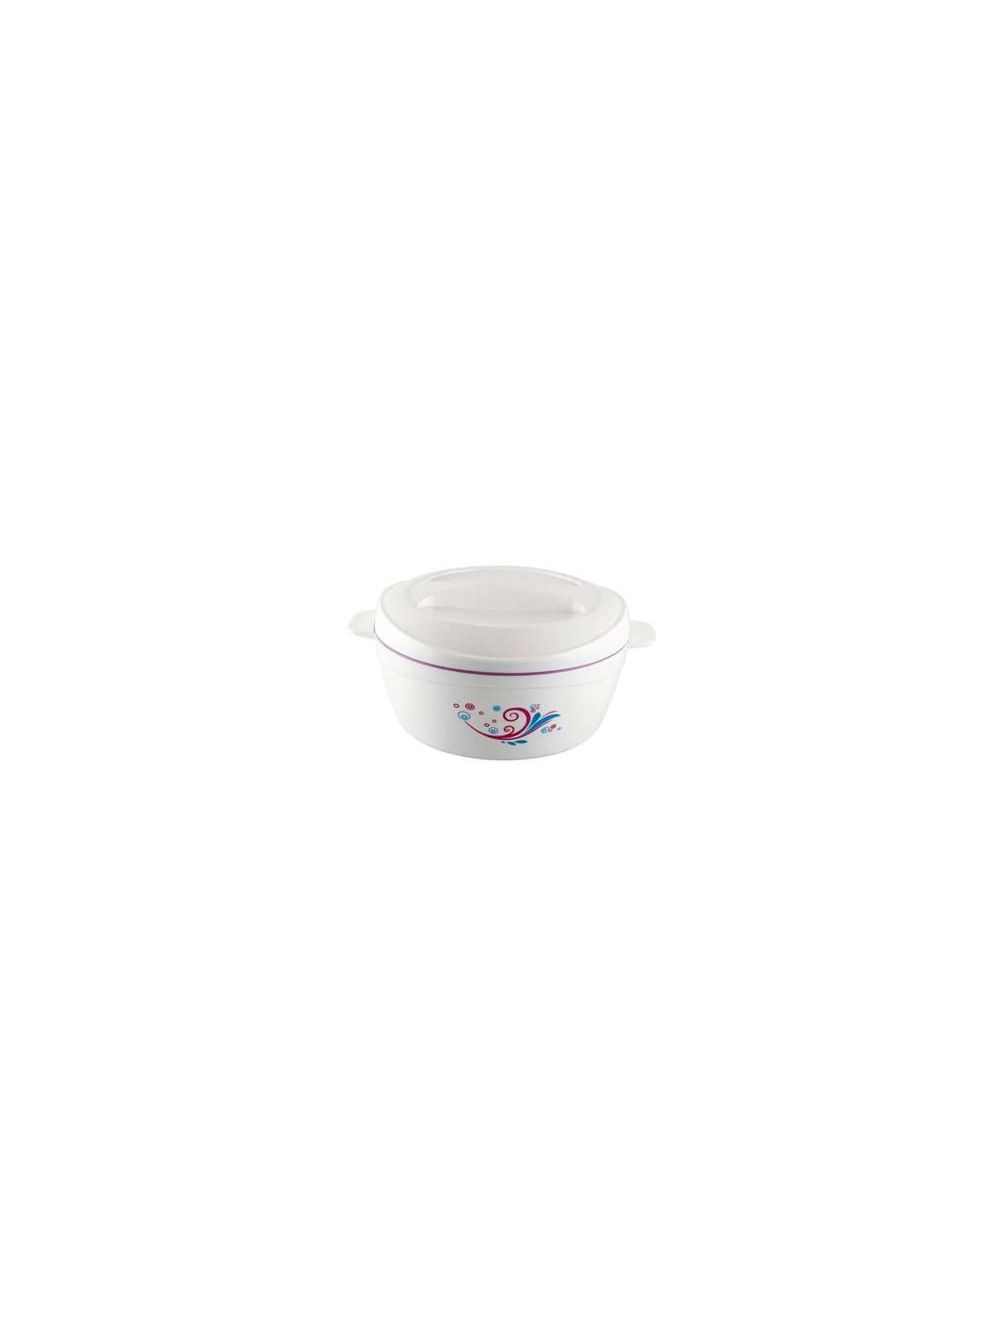 Royalford Deluxe Insulated Casserole 350 Ml White